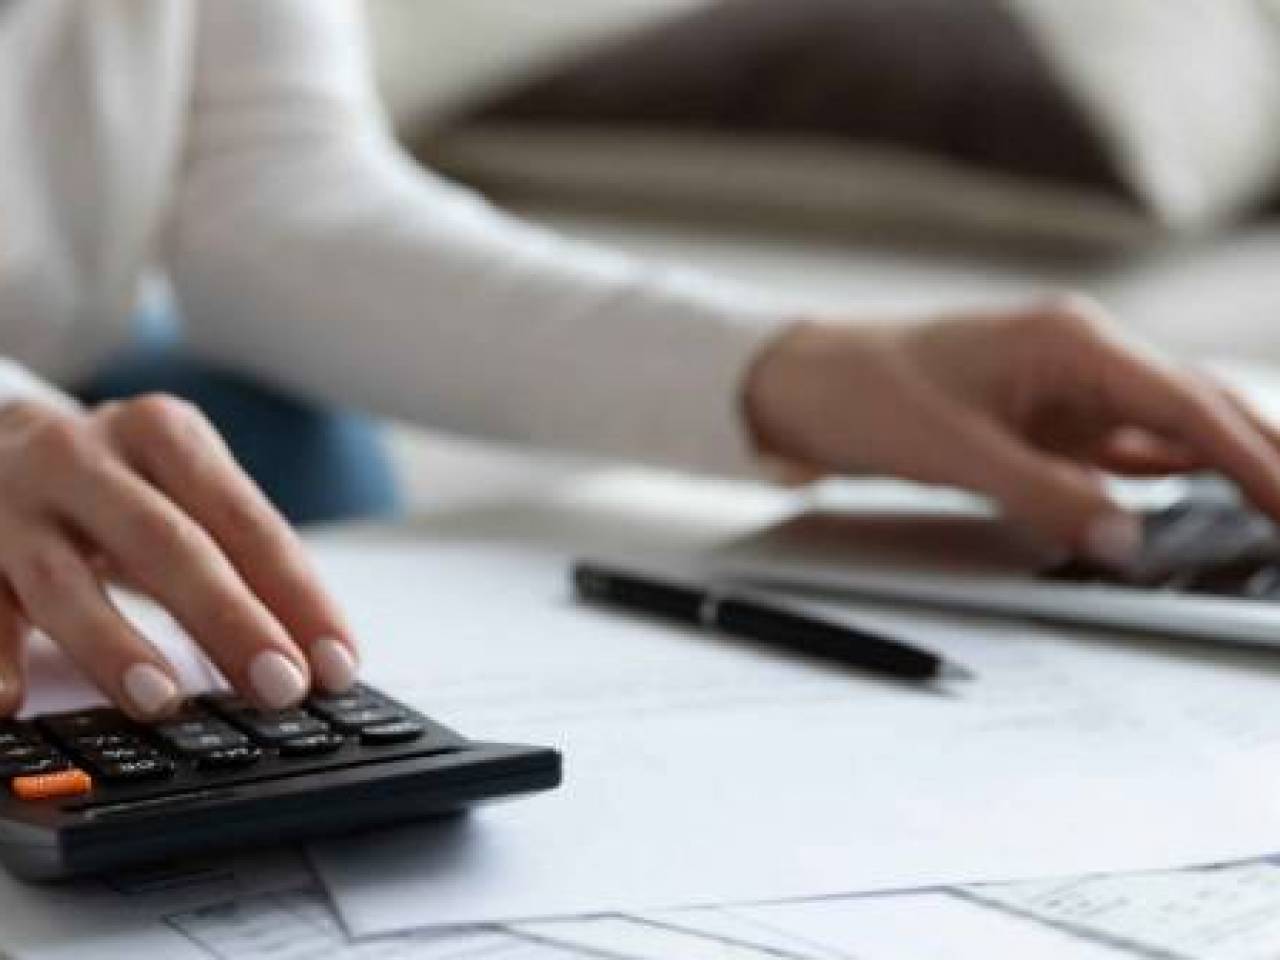 Close up of woman busy paying bills online on computer calculating household finances or taxes on machine, female manage home family expenditures, using calculator, make payment on laptop